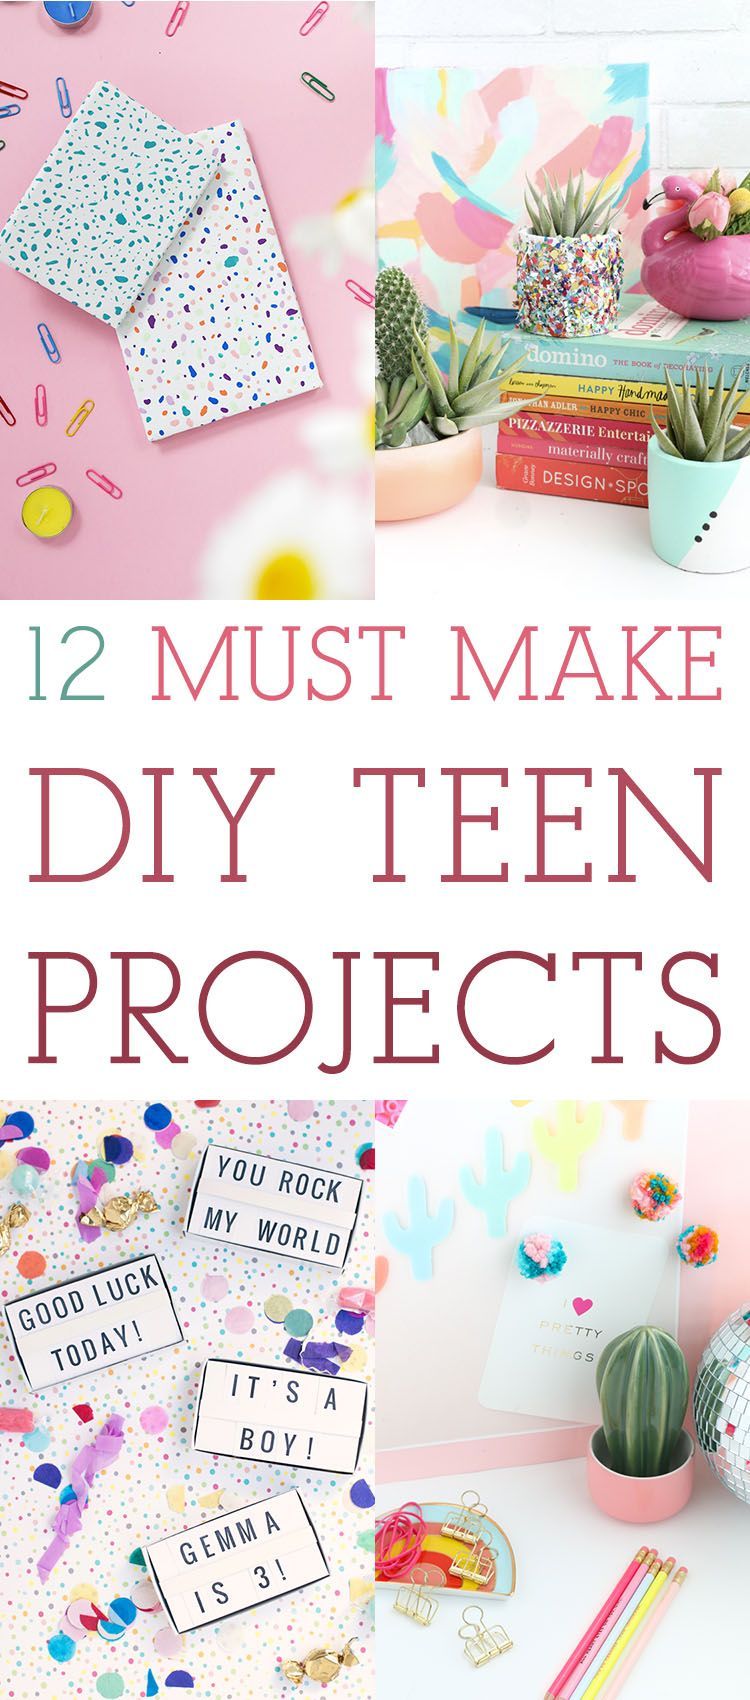 12 Must Make DIY Teen Projects! // Great for Gifts - The Cottage Market - 12 Must Make DIY Teen Projects! // Great for Gifts - The Cottage Market -   18 diy Projects for teenagers ideas